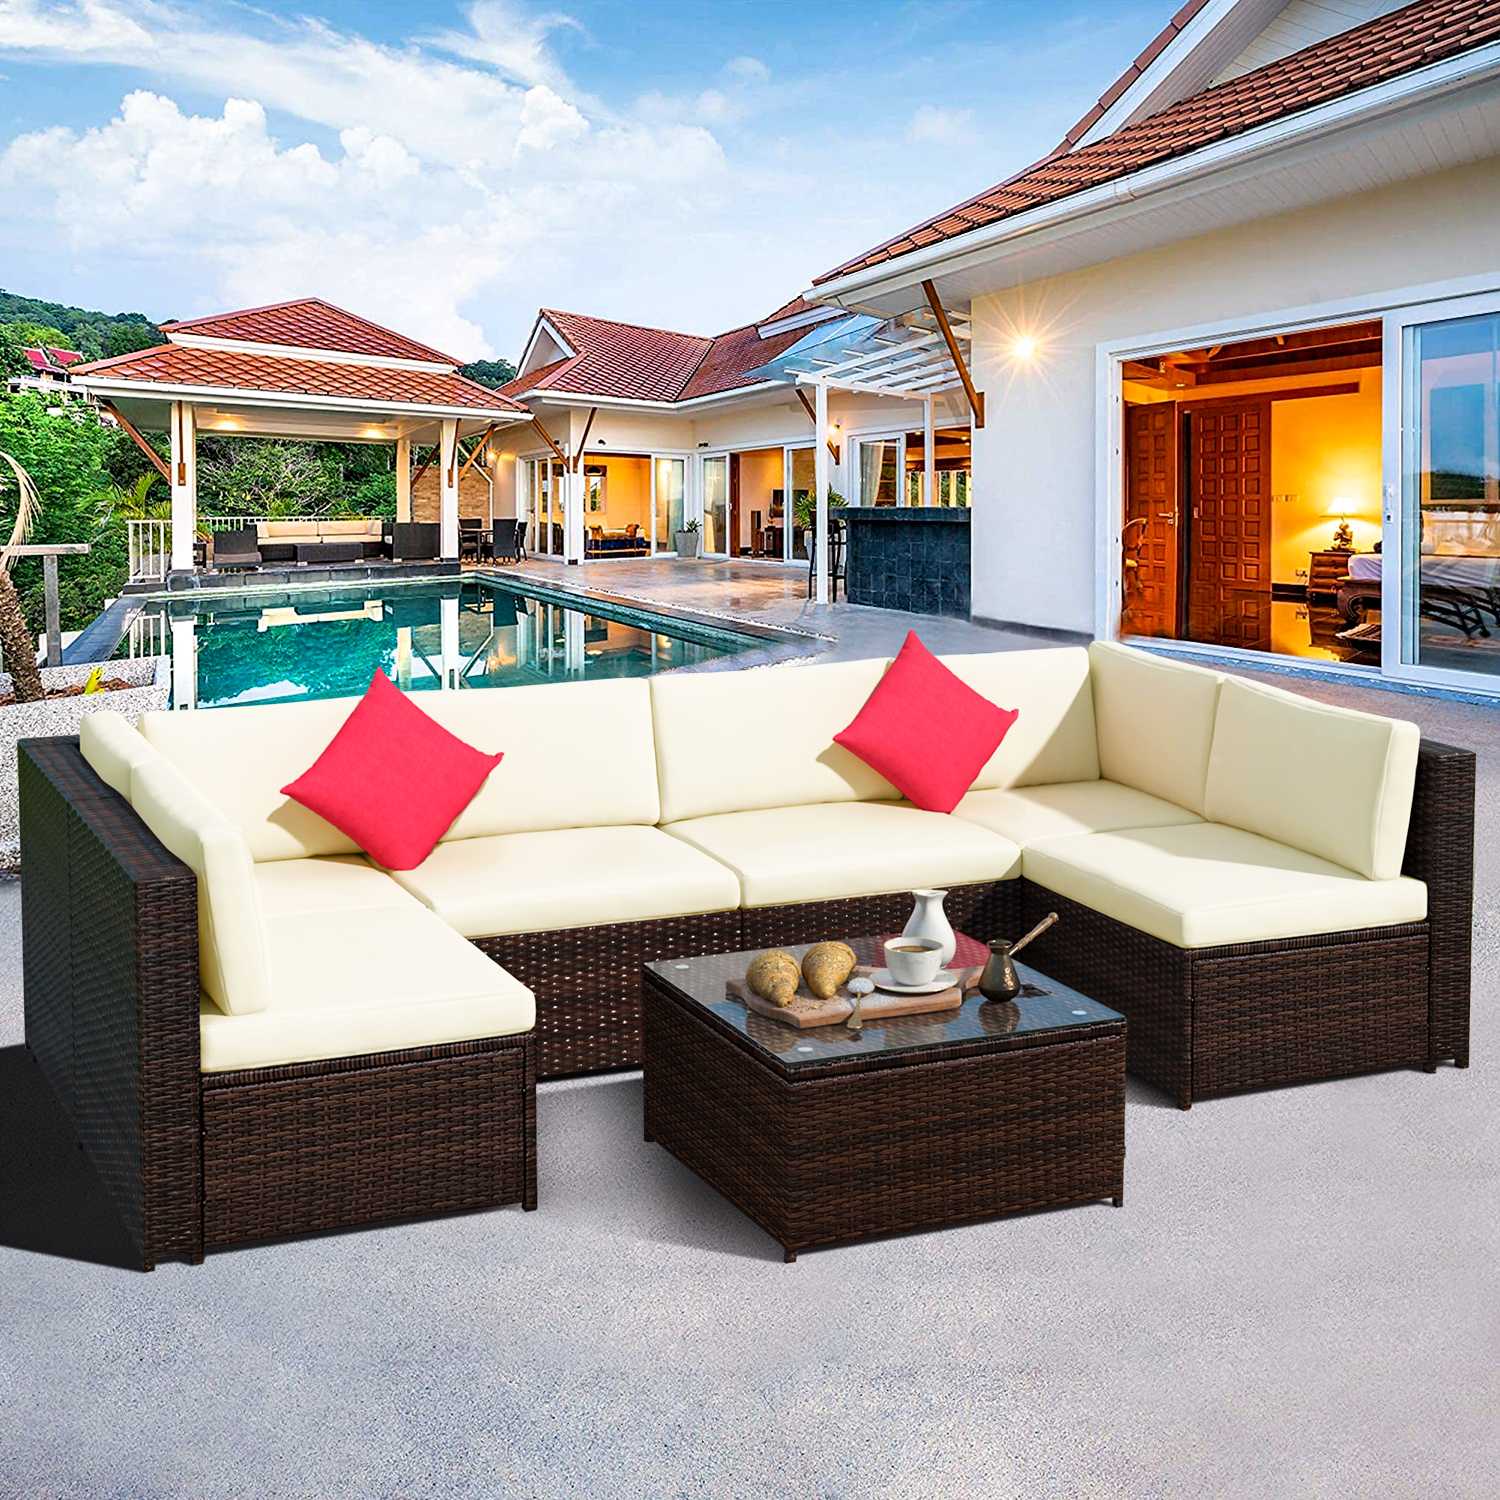 SEGMART Wicker Patio Furniture Sets, 2021 Newest 7-Piece Wicker Patio Conversation Furniture Set w/Seat Cushions & Tempered Glass Coffee, Conversation Sets for Porch Poolside Backyard Garden, S13083 - image 1 of 9